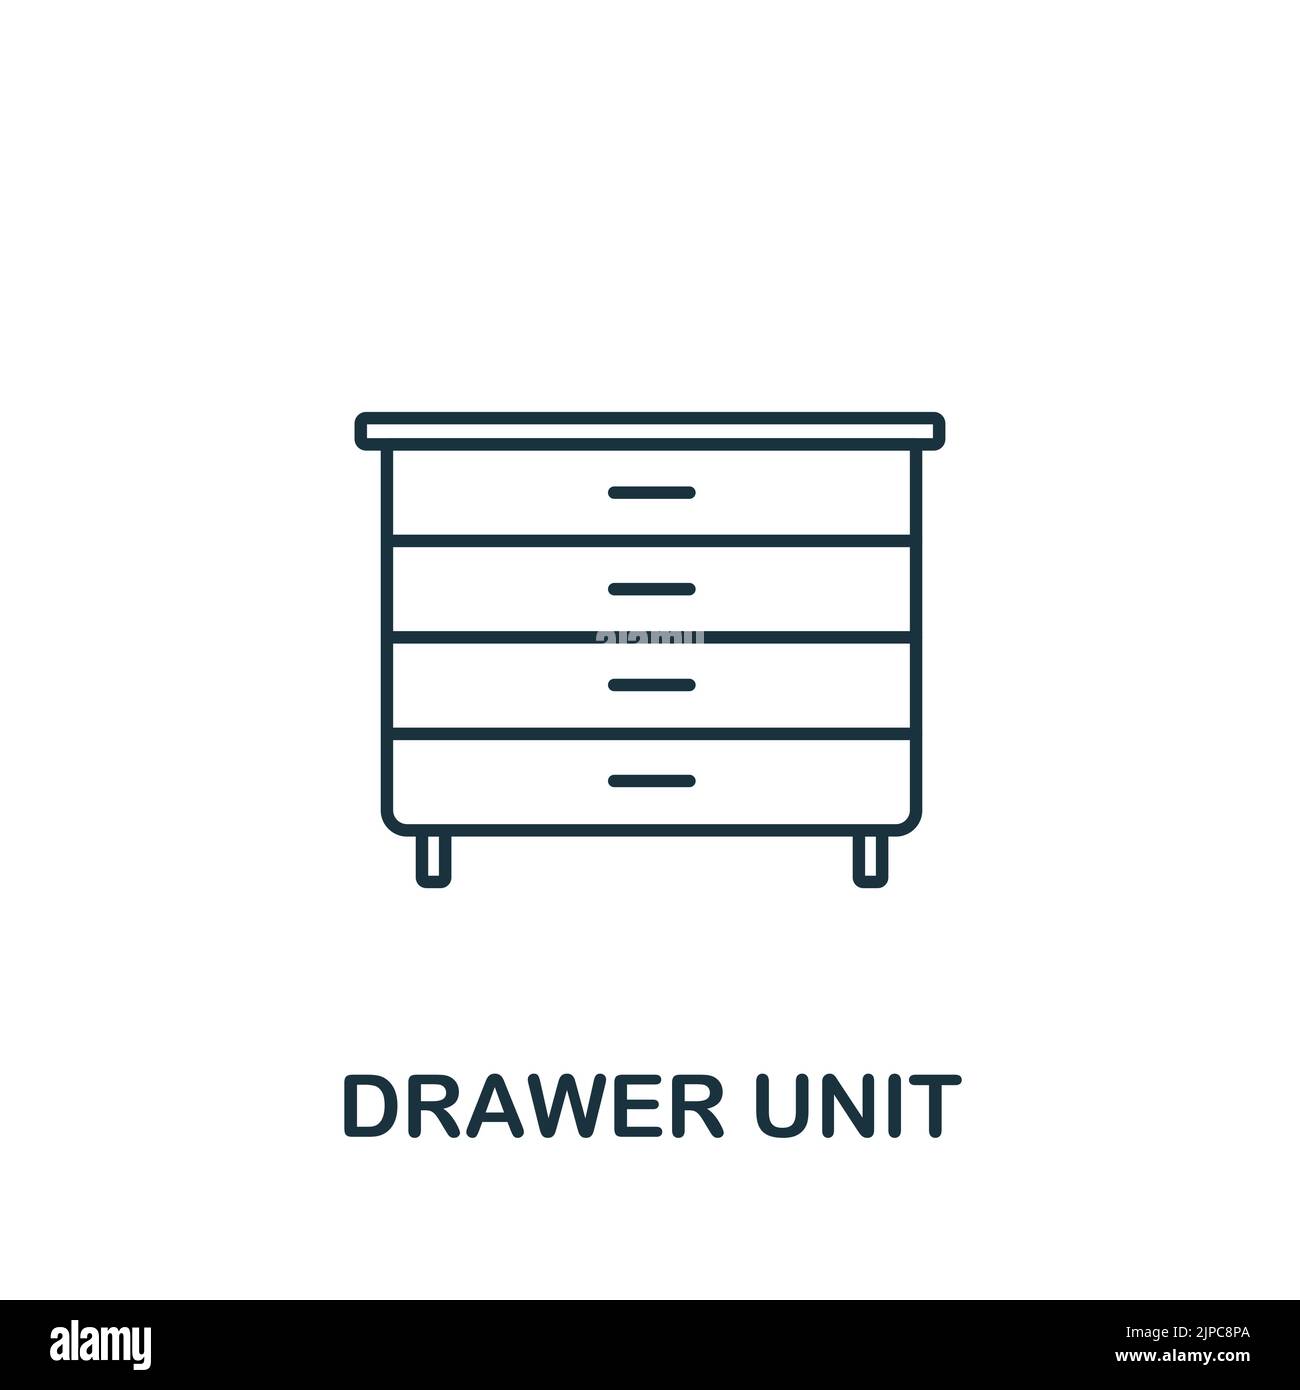 Drawer Unit icon. Line simple Interior Furniture icon for templates, web design and infographics Stock Vector